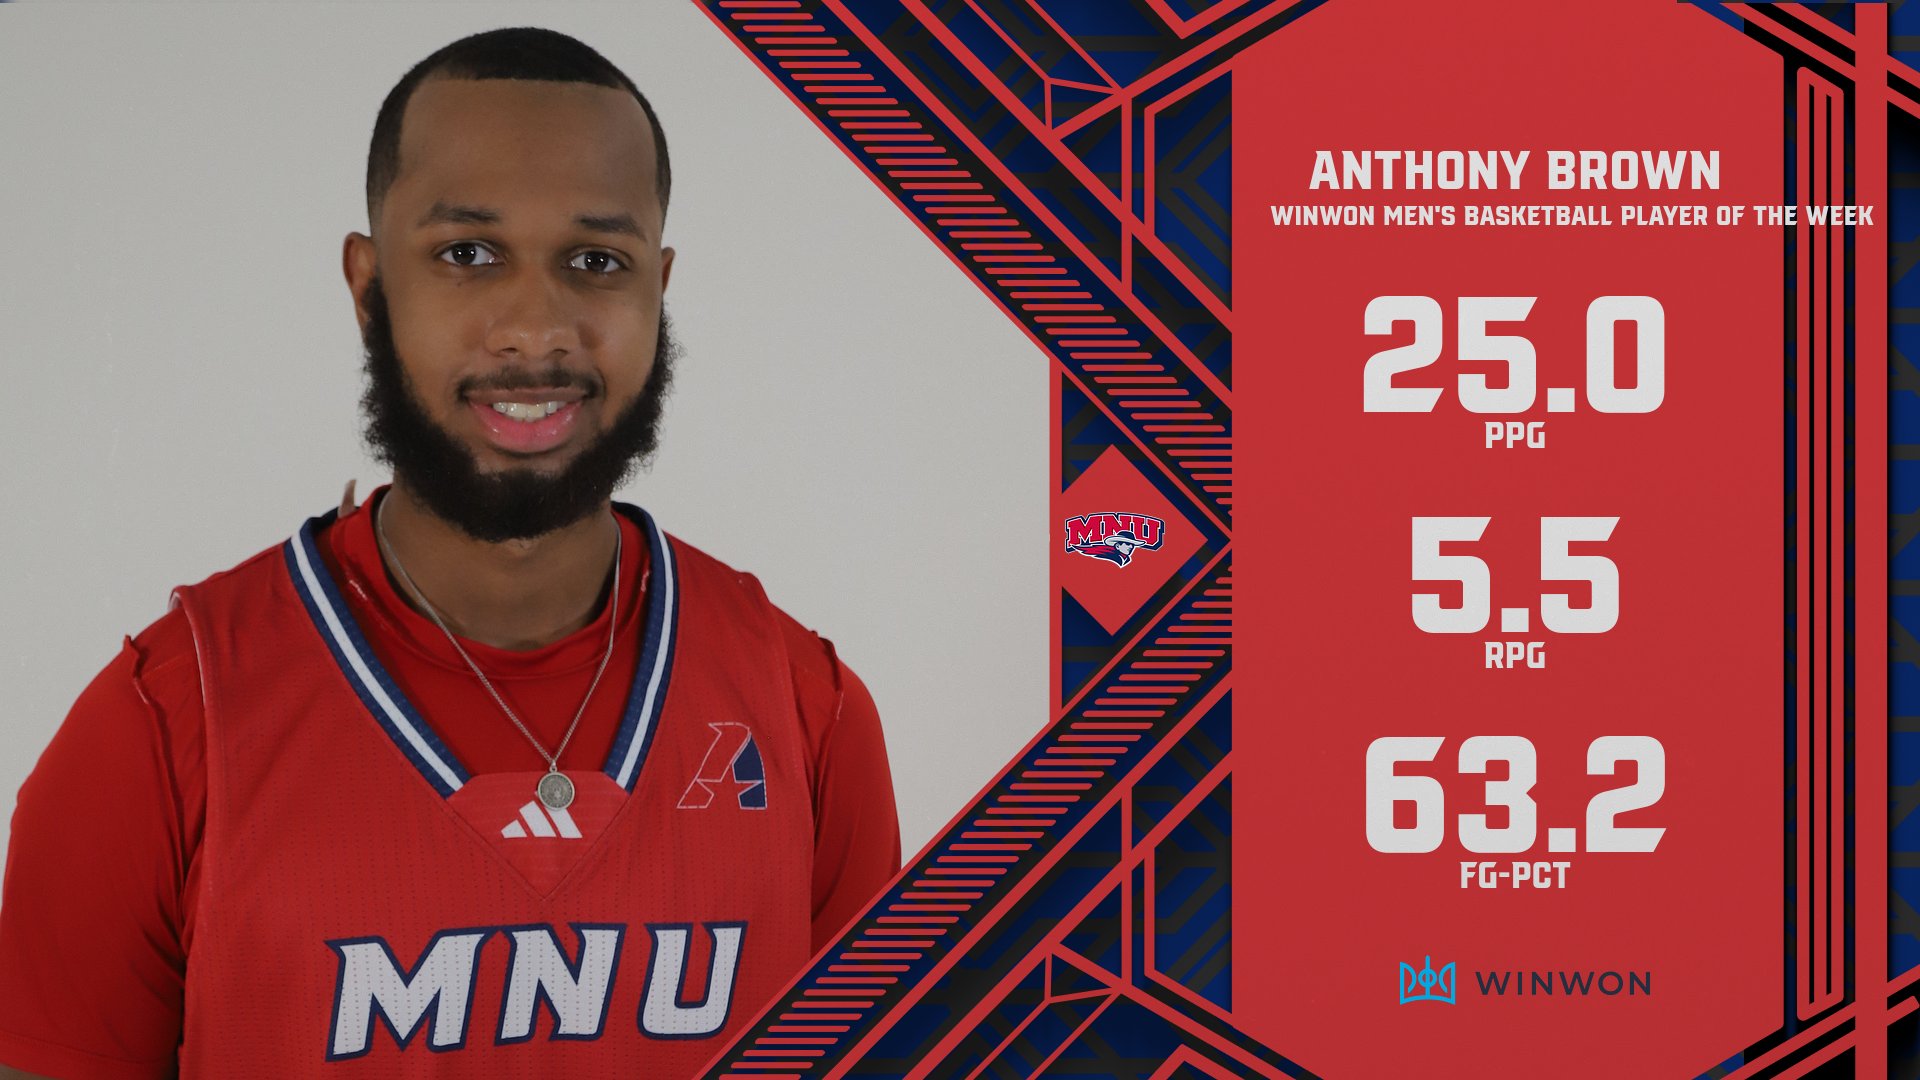 Anthony Brown of (RV) MidAmerica Nazarene Secures Back-to-Back WinWon Men’s Basketball Player of the Week